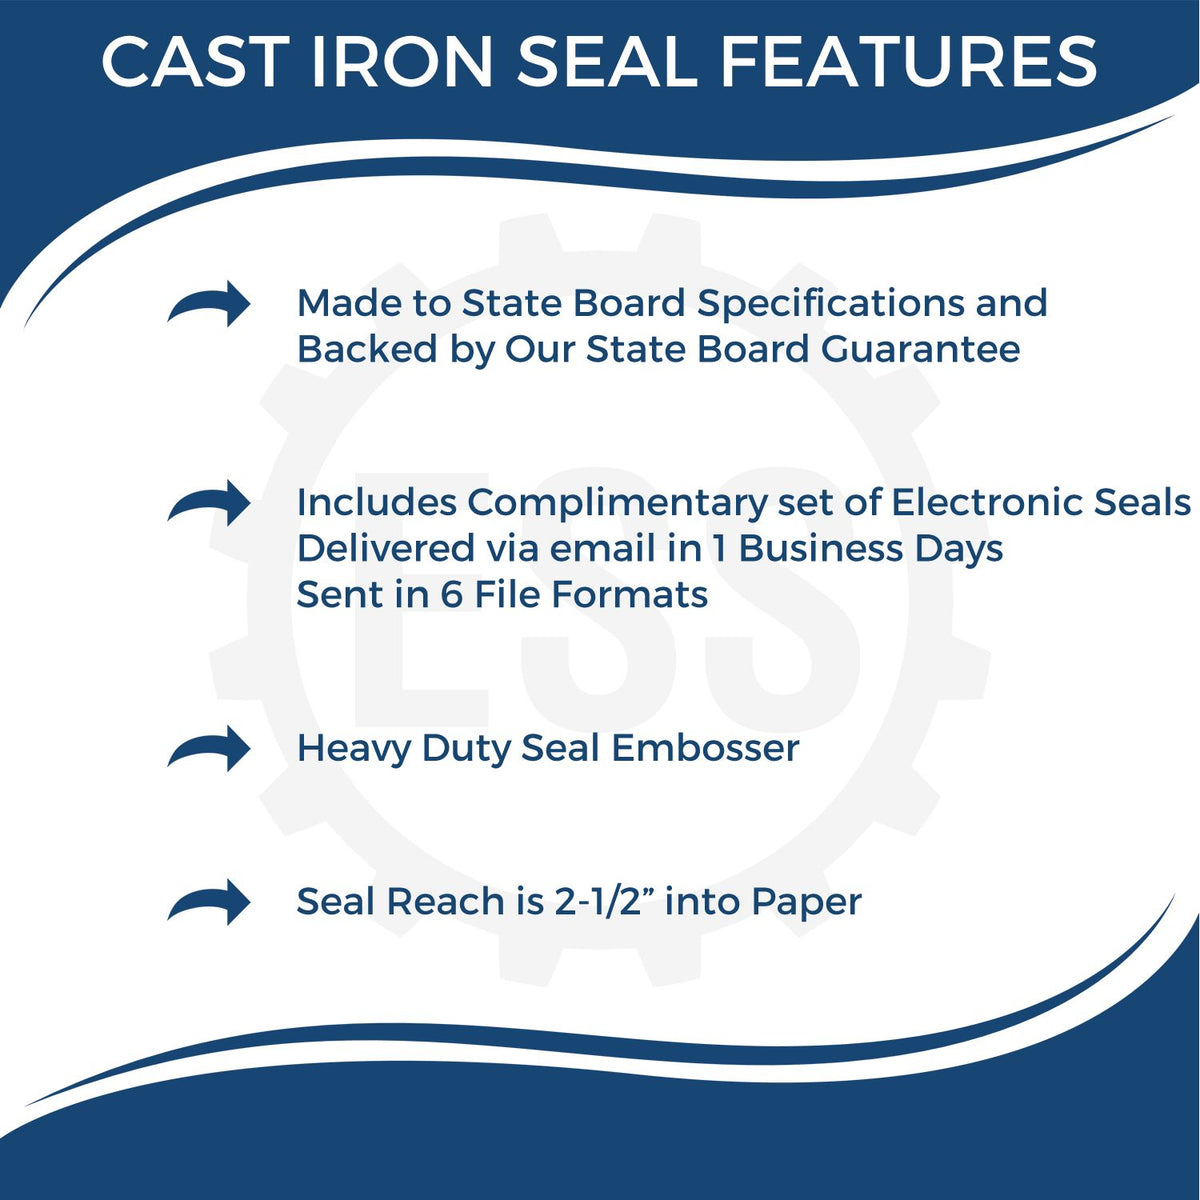 A picture of an infographic highlighting the selling points for the Heavy Duty Cast Iron Nevada Engineer Seal Embosser